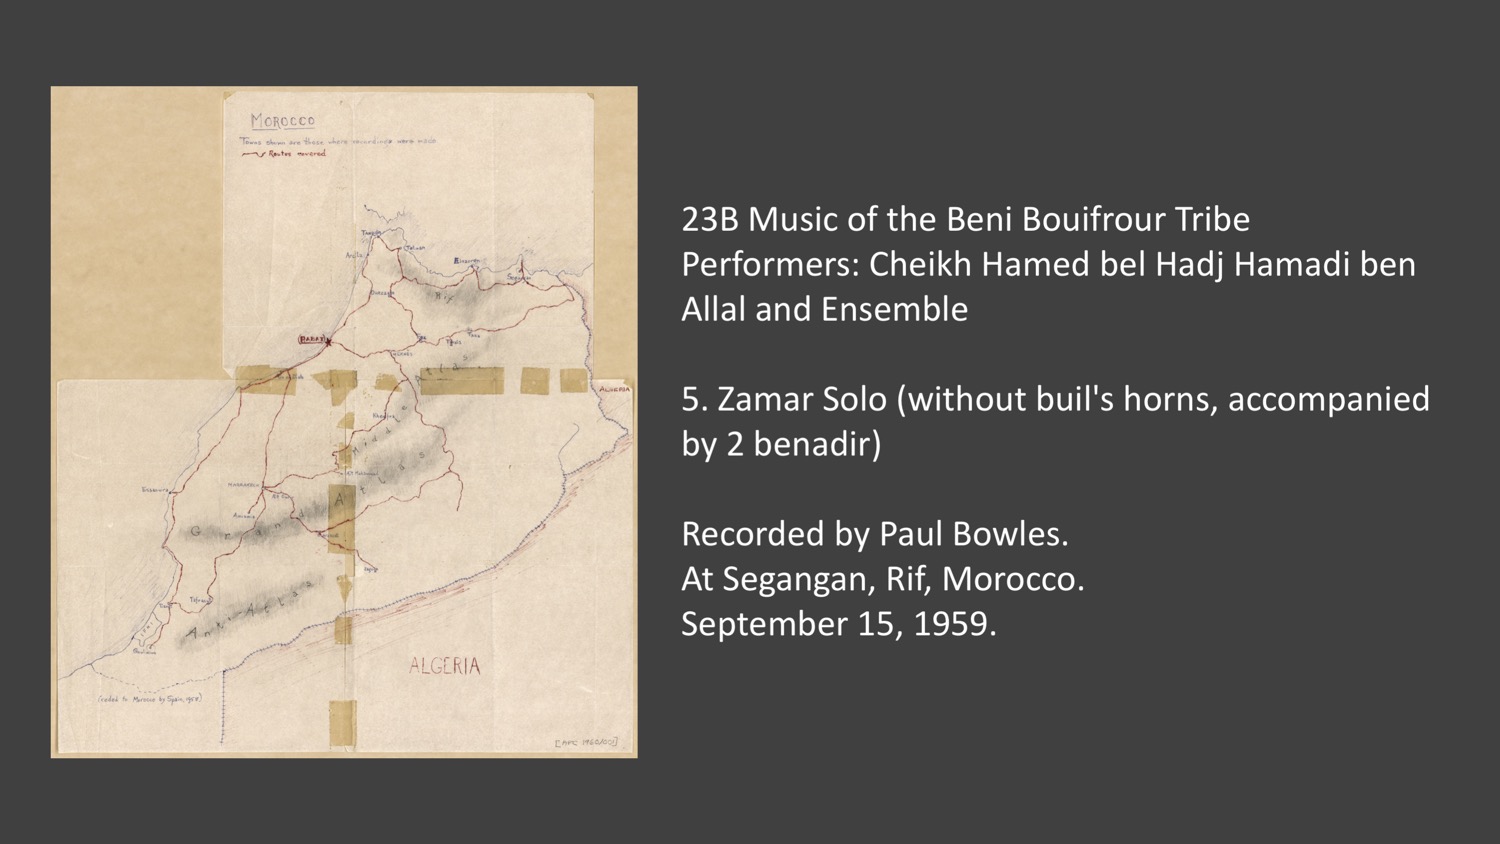 23B 5 Zamar Solo (without buil's horns, accompanied by 2 benadir)
Music of the Beni Bouifrour Tribe
Performers: Cheikh Hamed bel Hadj Hamadi ben Allal and Ensemble
Recorded by Paul Bowles at Segangan, Rif, Morocco. September 15, 1959.